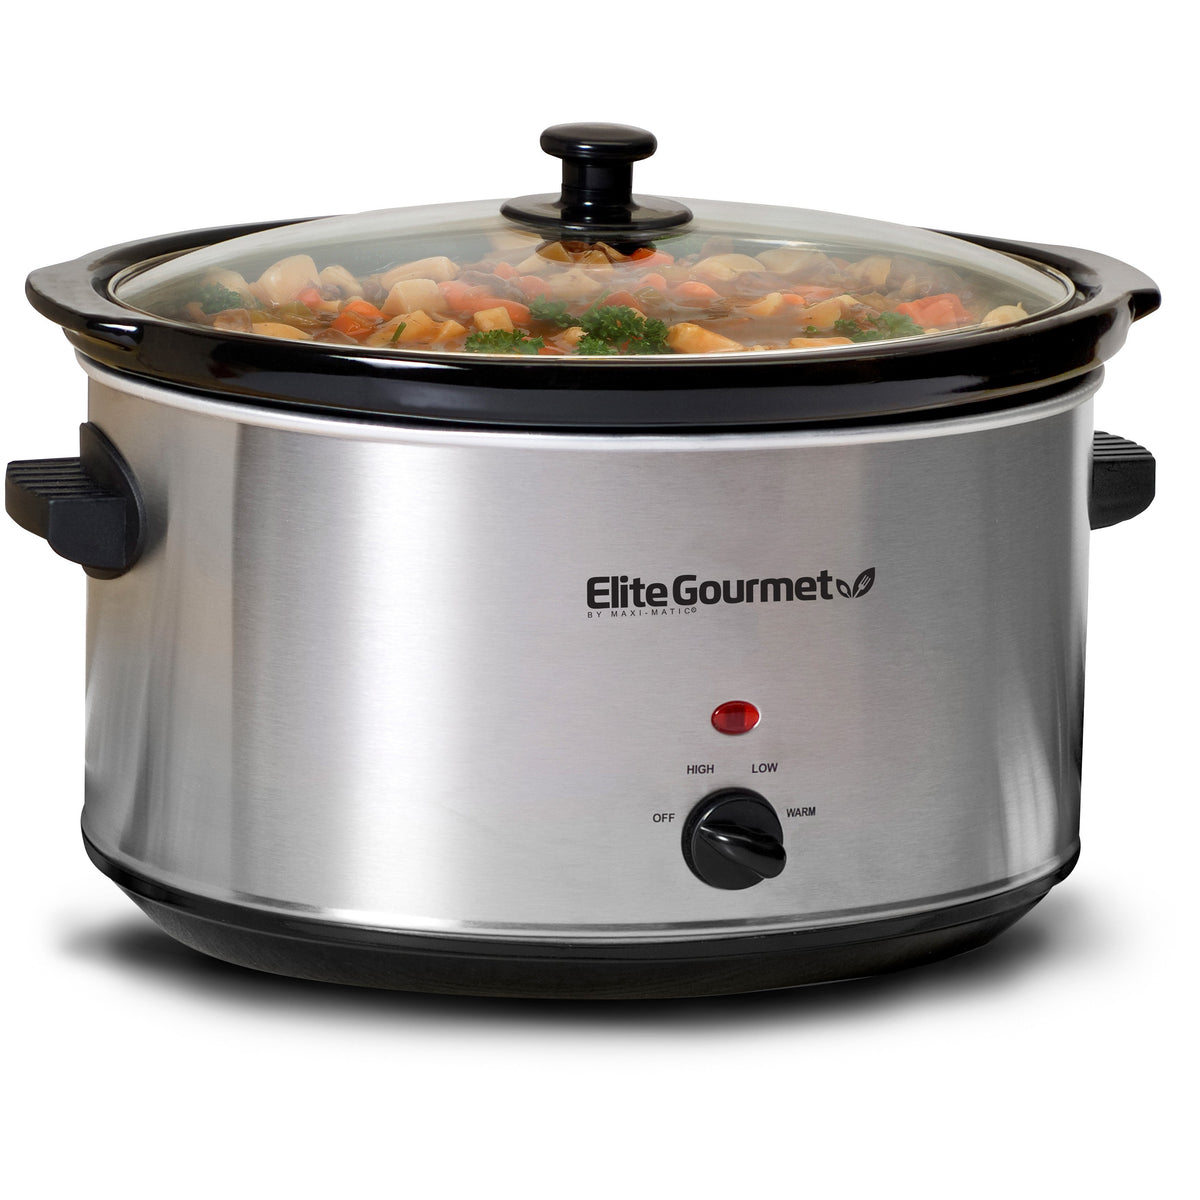  Elite Gourmet Stainless Steel Slow Cooker, Dishwasher-Safe with  Tempered Glass Lid, Cool-Touch Handles, Removable Stoneware Pot, 8.5 Quart,MST-900V:  Crock Pot: Home & Kitchen